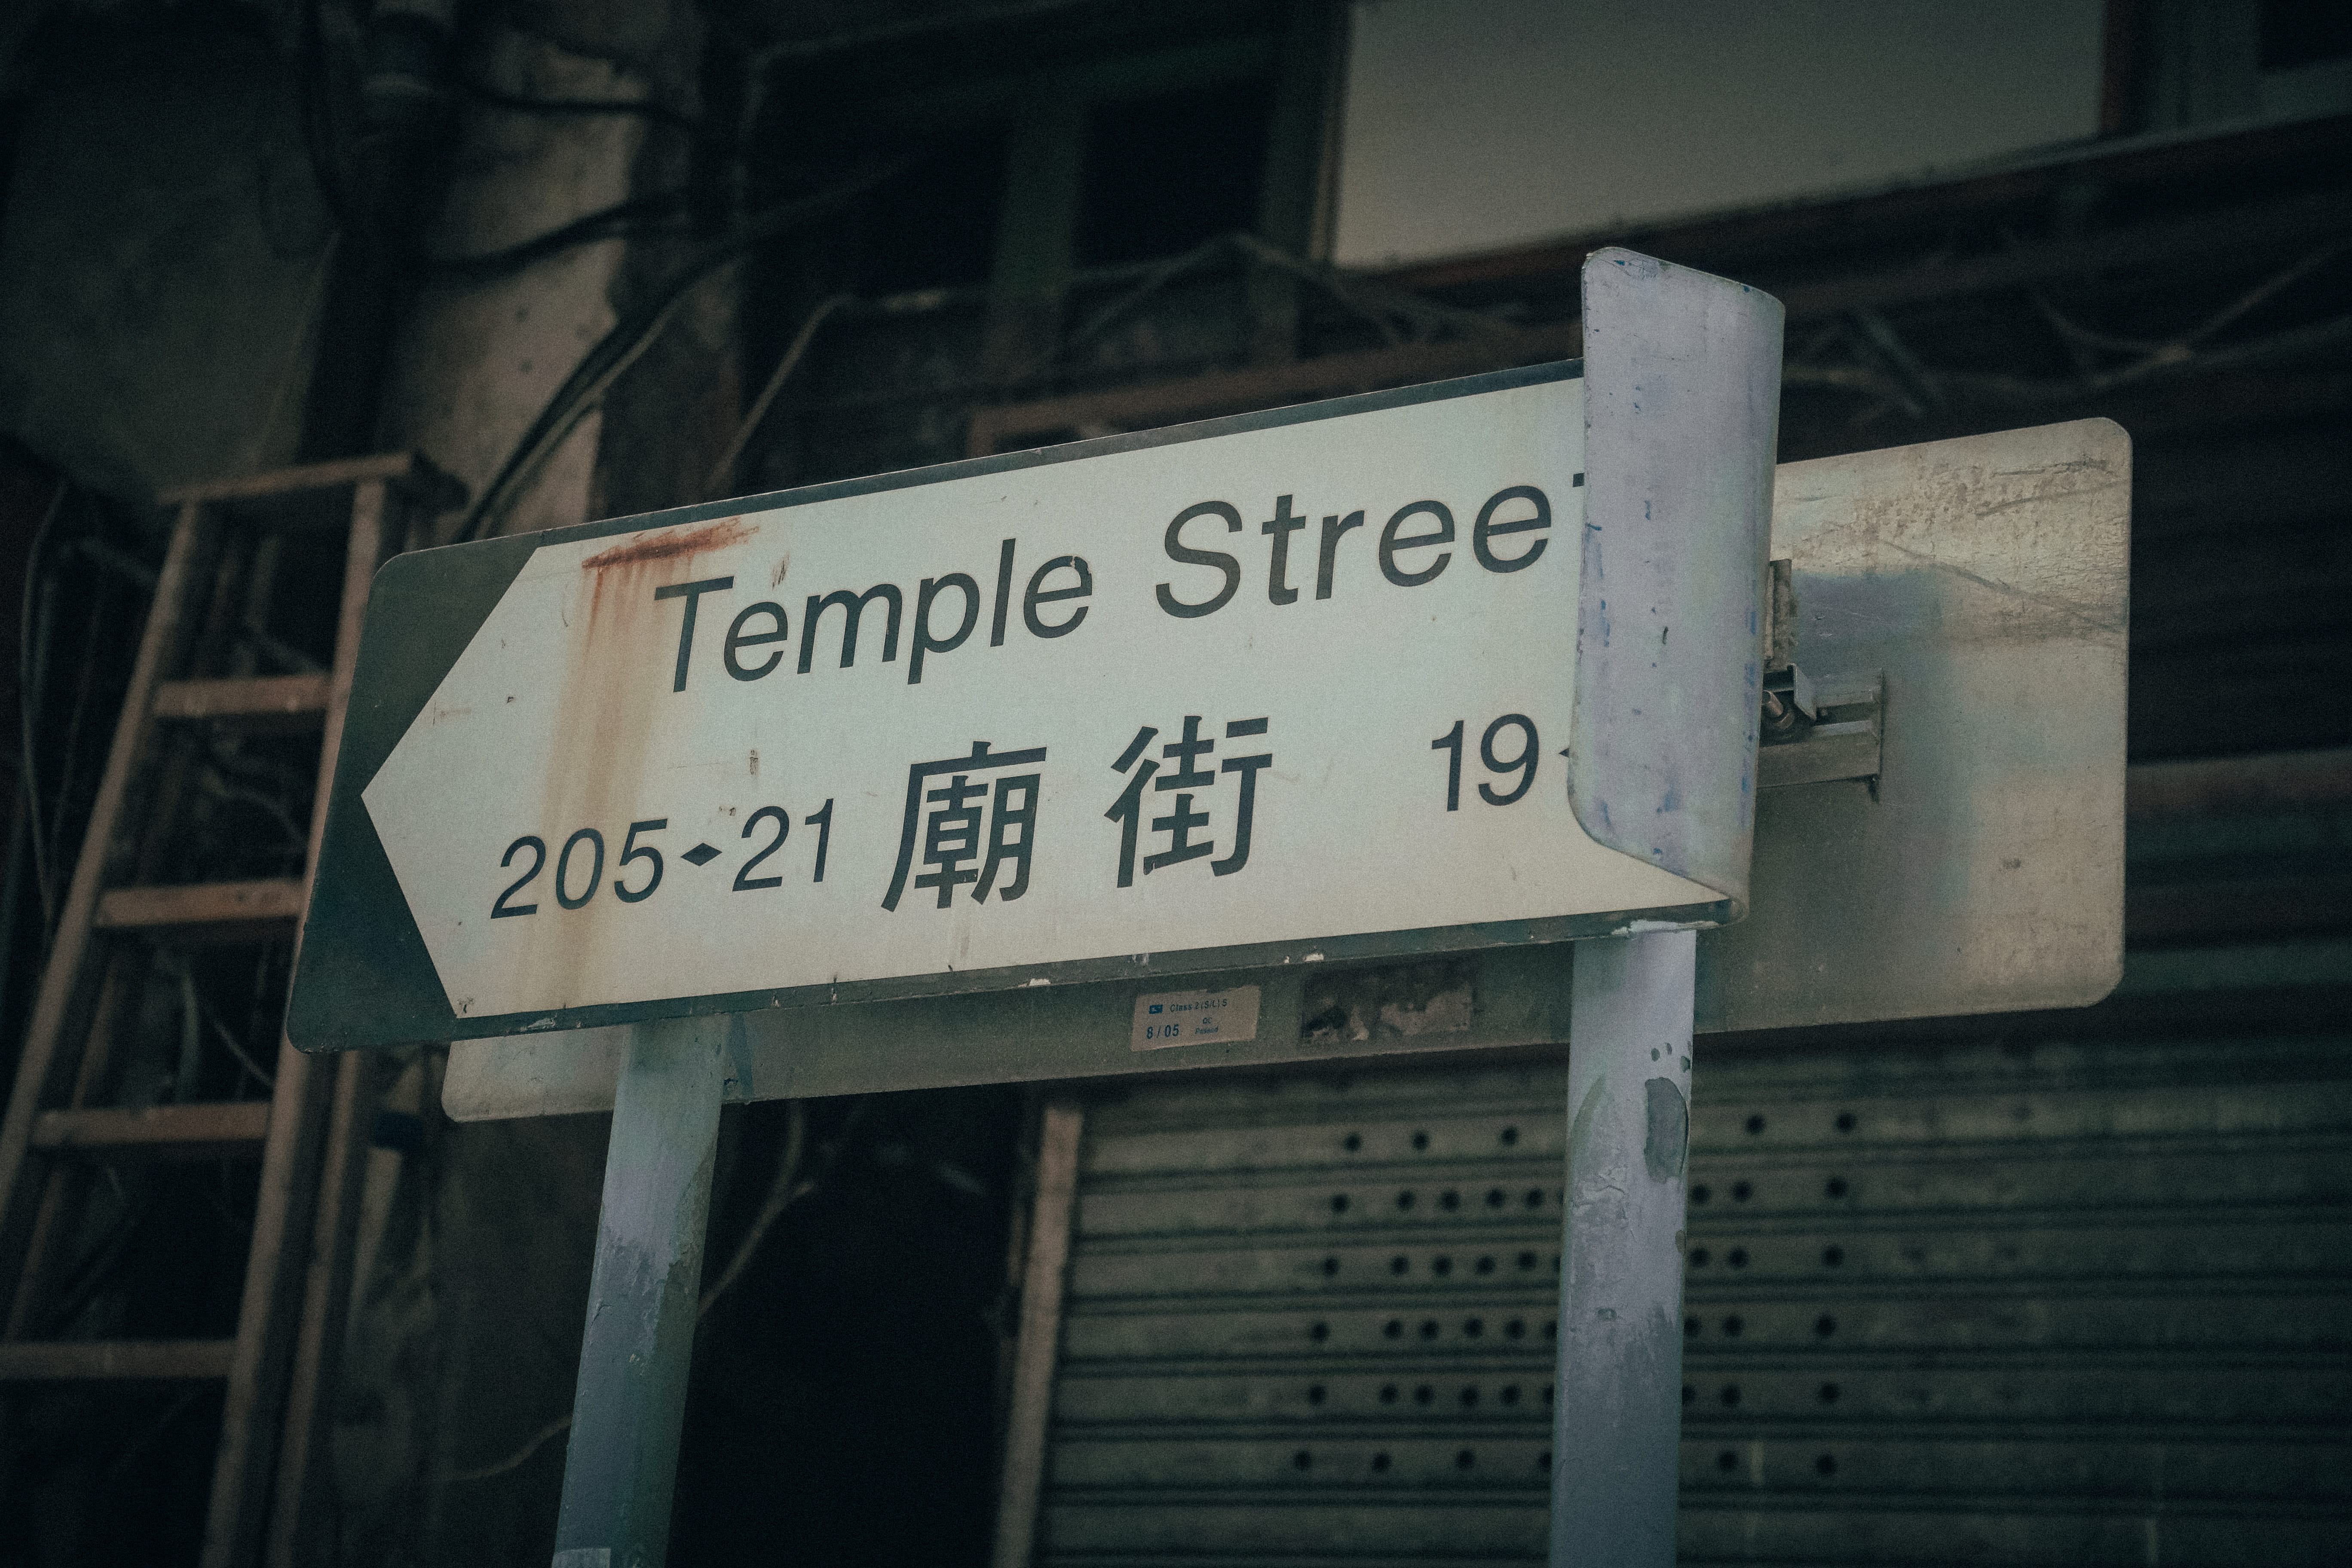 Temple Street 205-21 signage, grey, text, banner, street sign